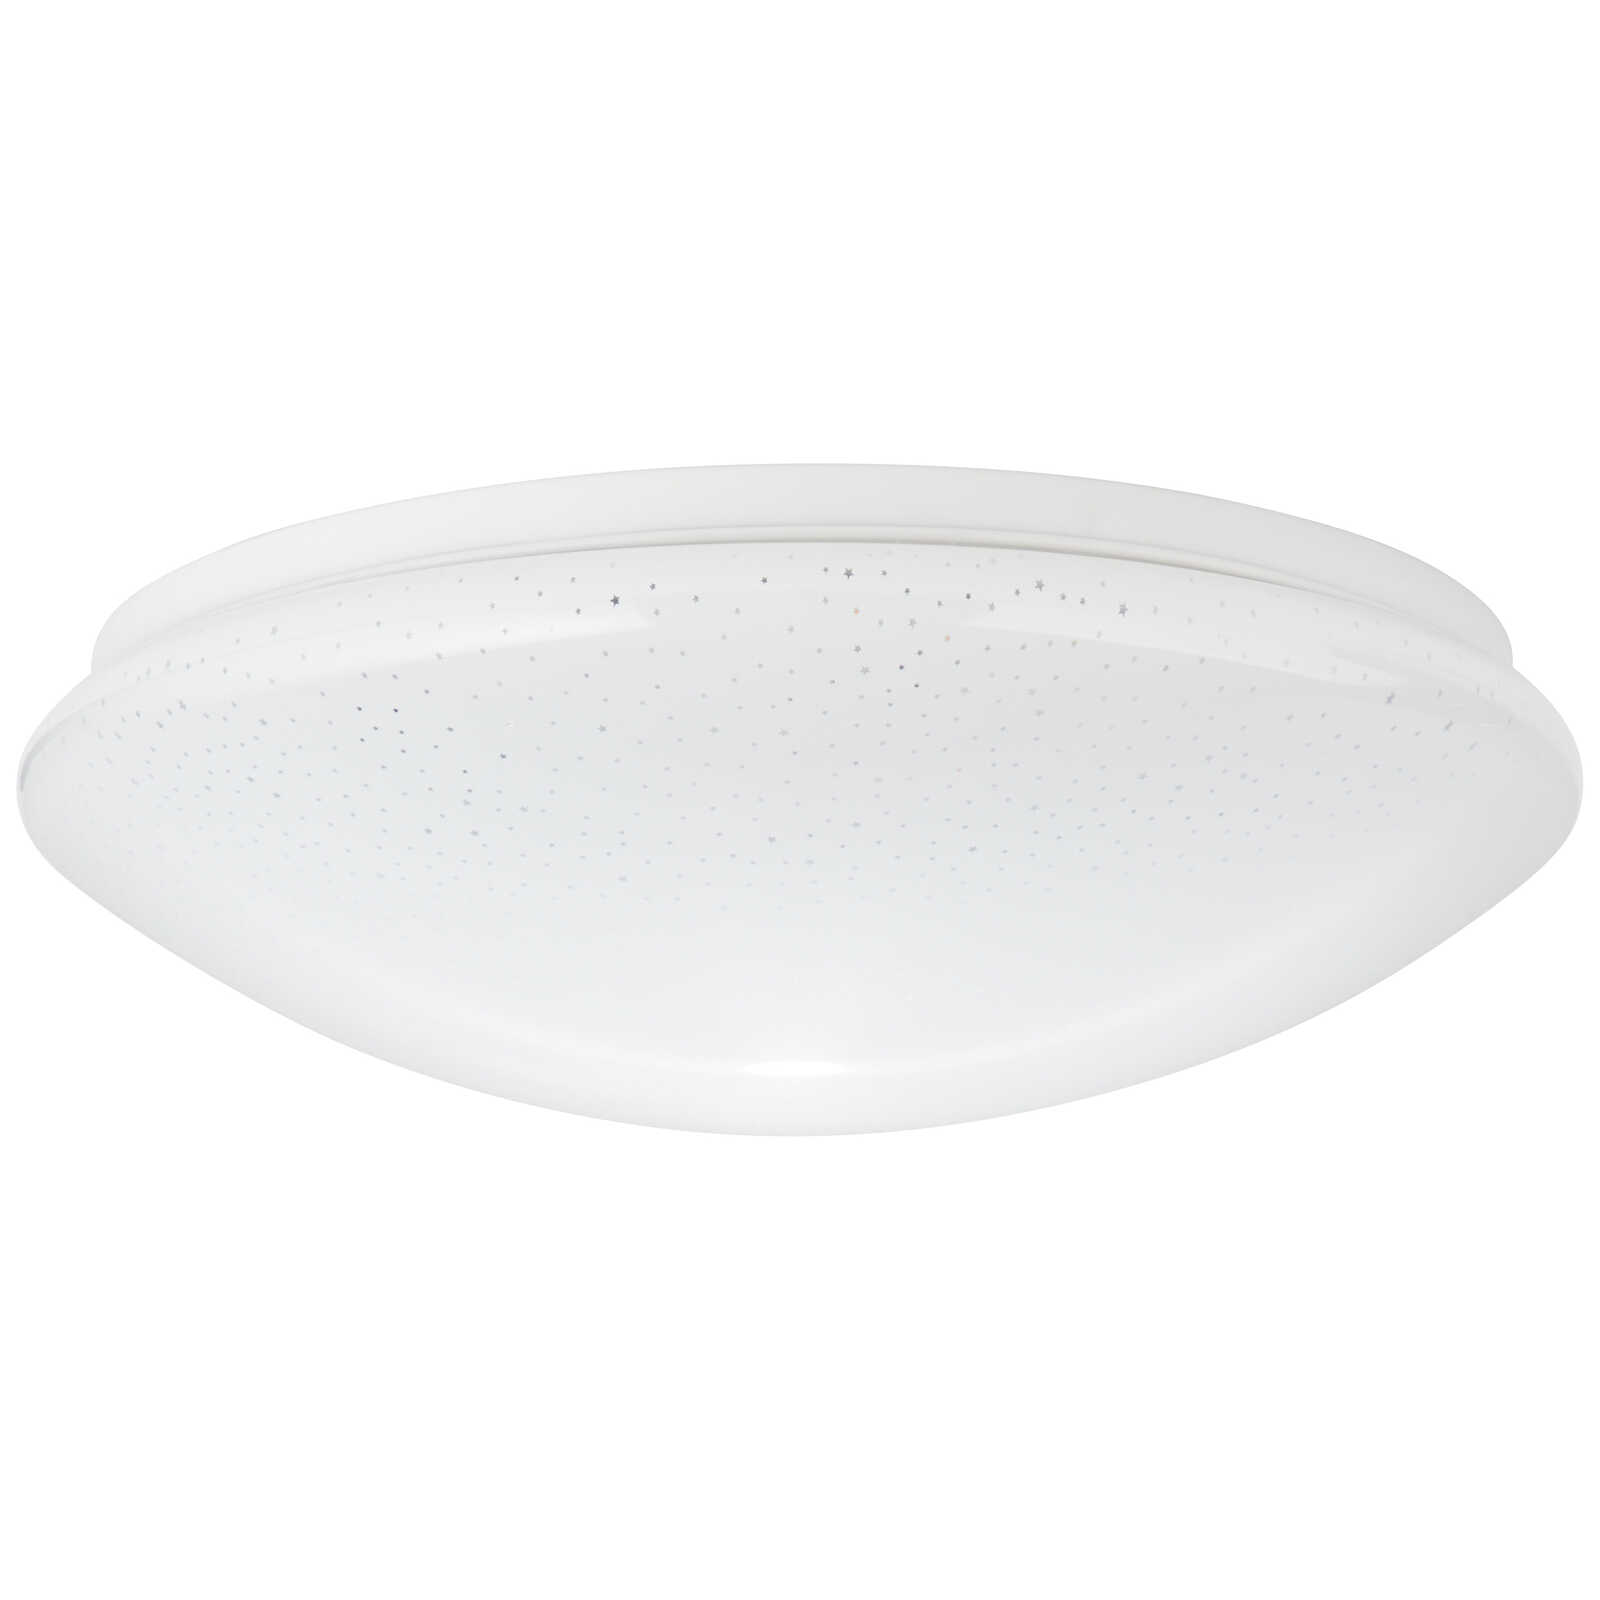             Plastic wall and ceiling light - Friedrich 2 - White
        